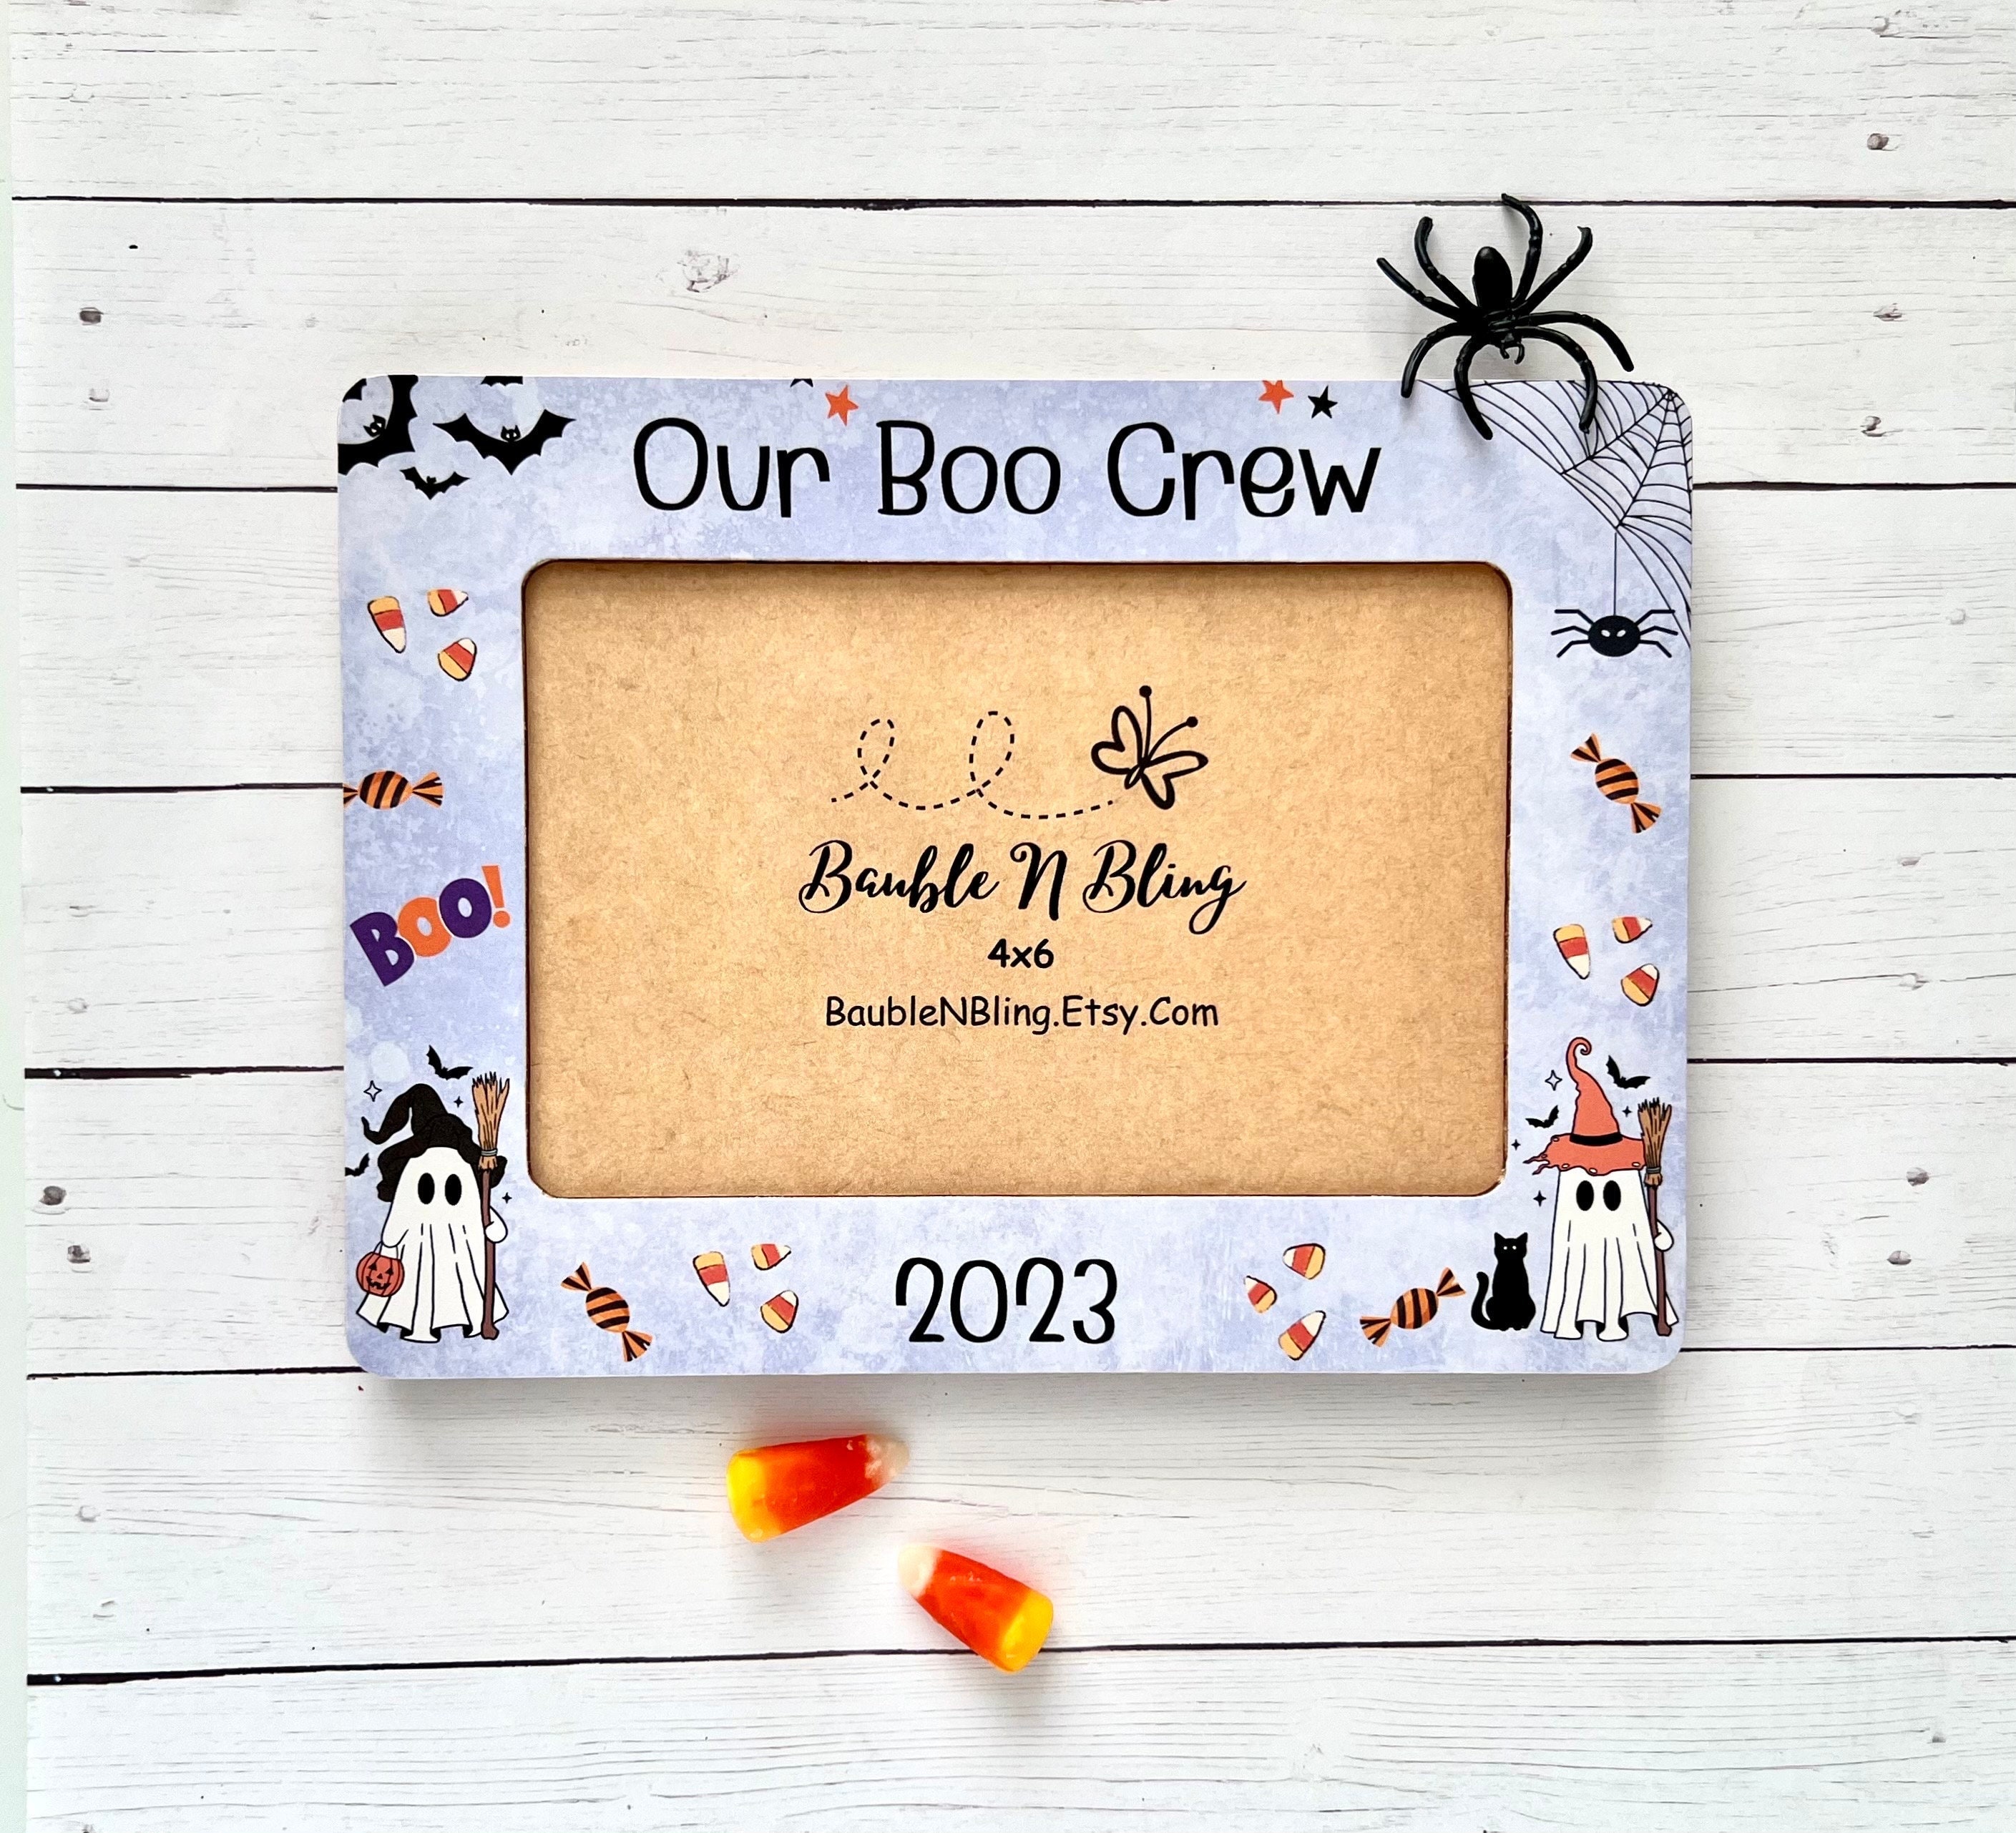 Spooktacular Bat Picture Frame Craft for Halloween - Mama Likes This